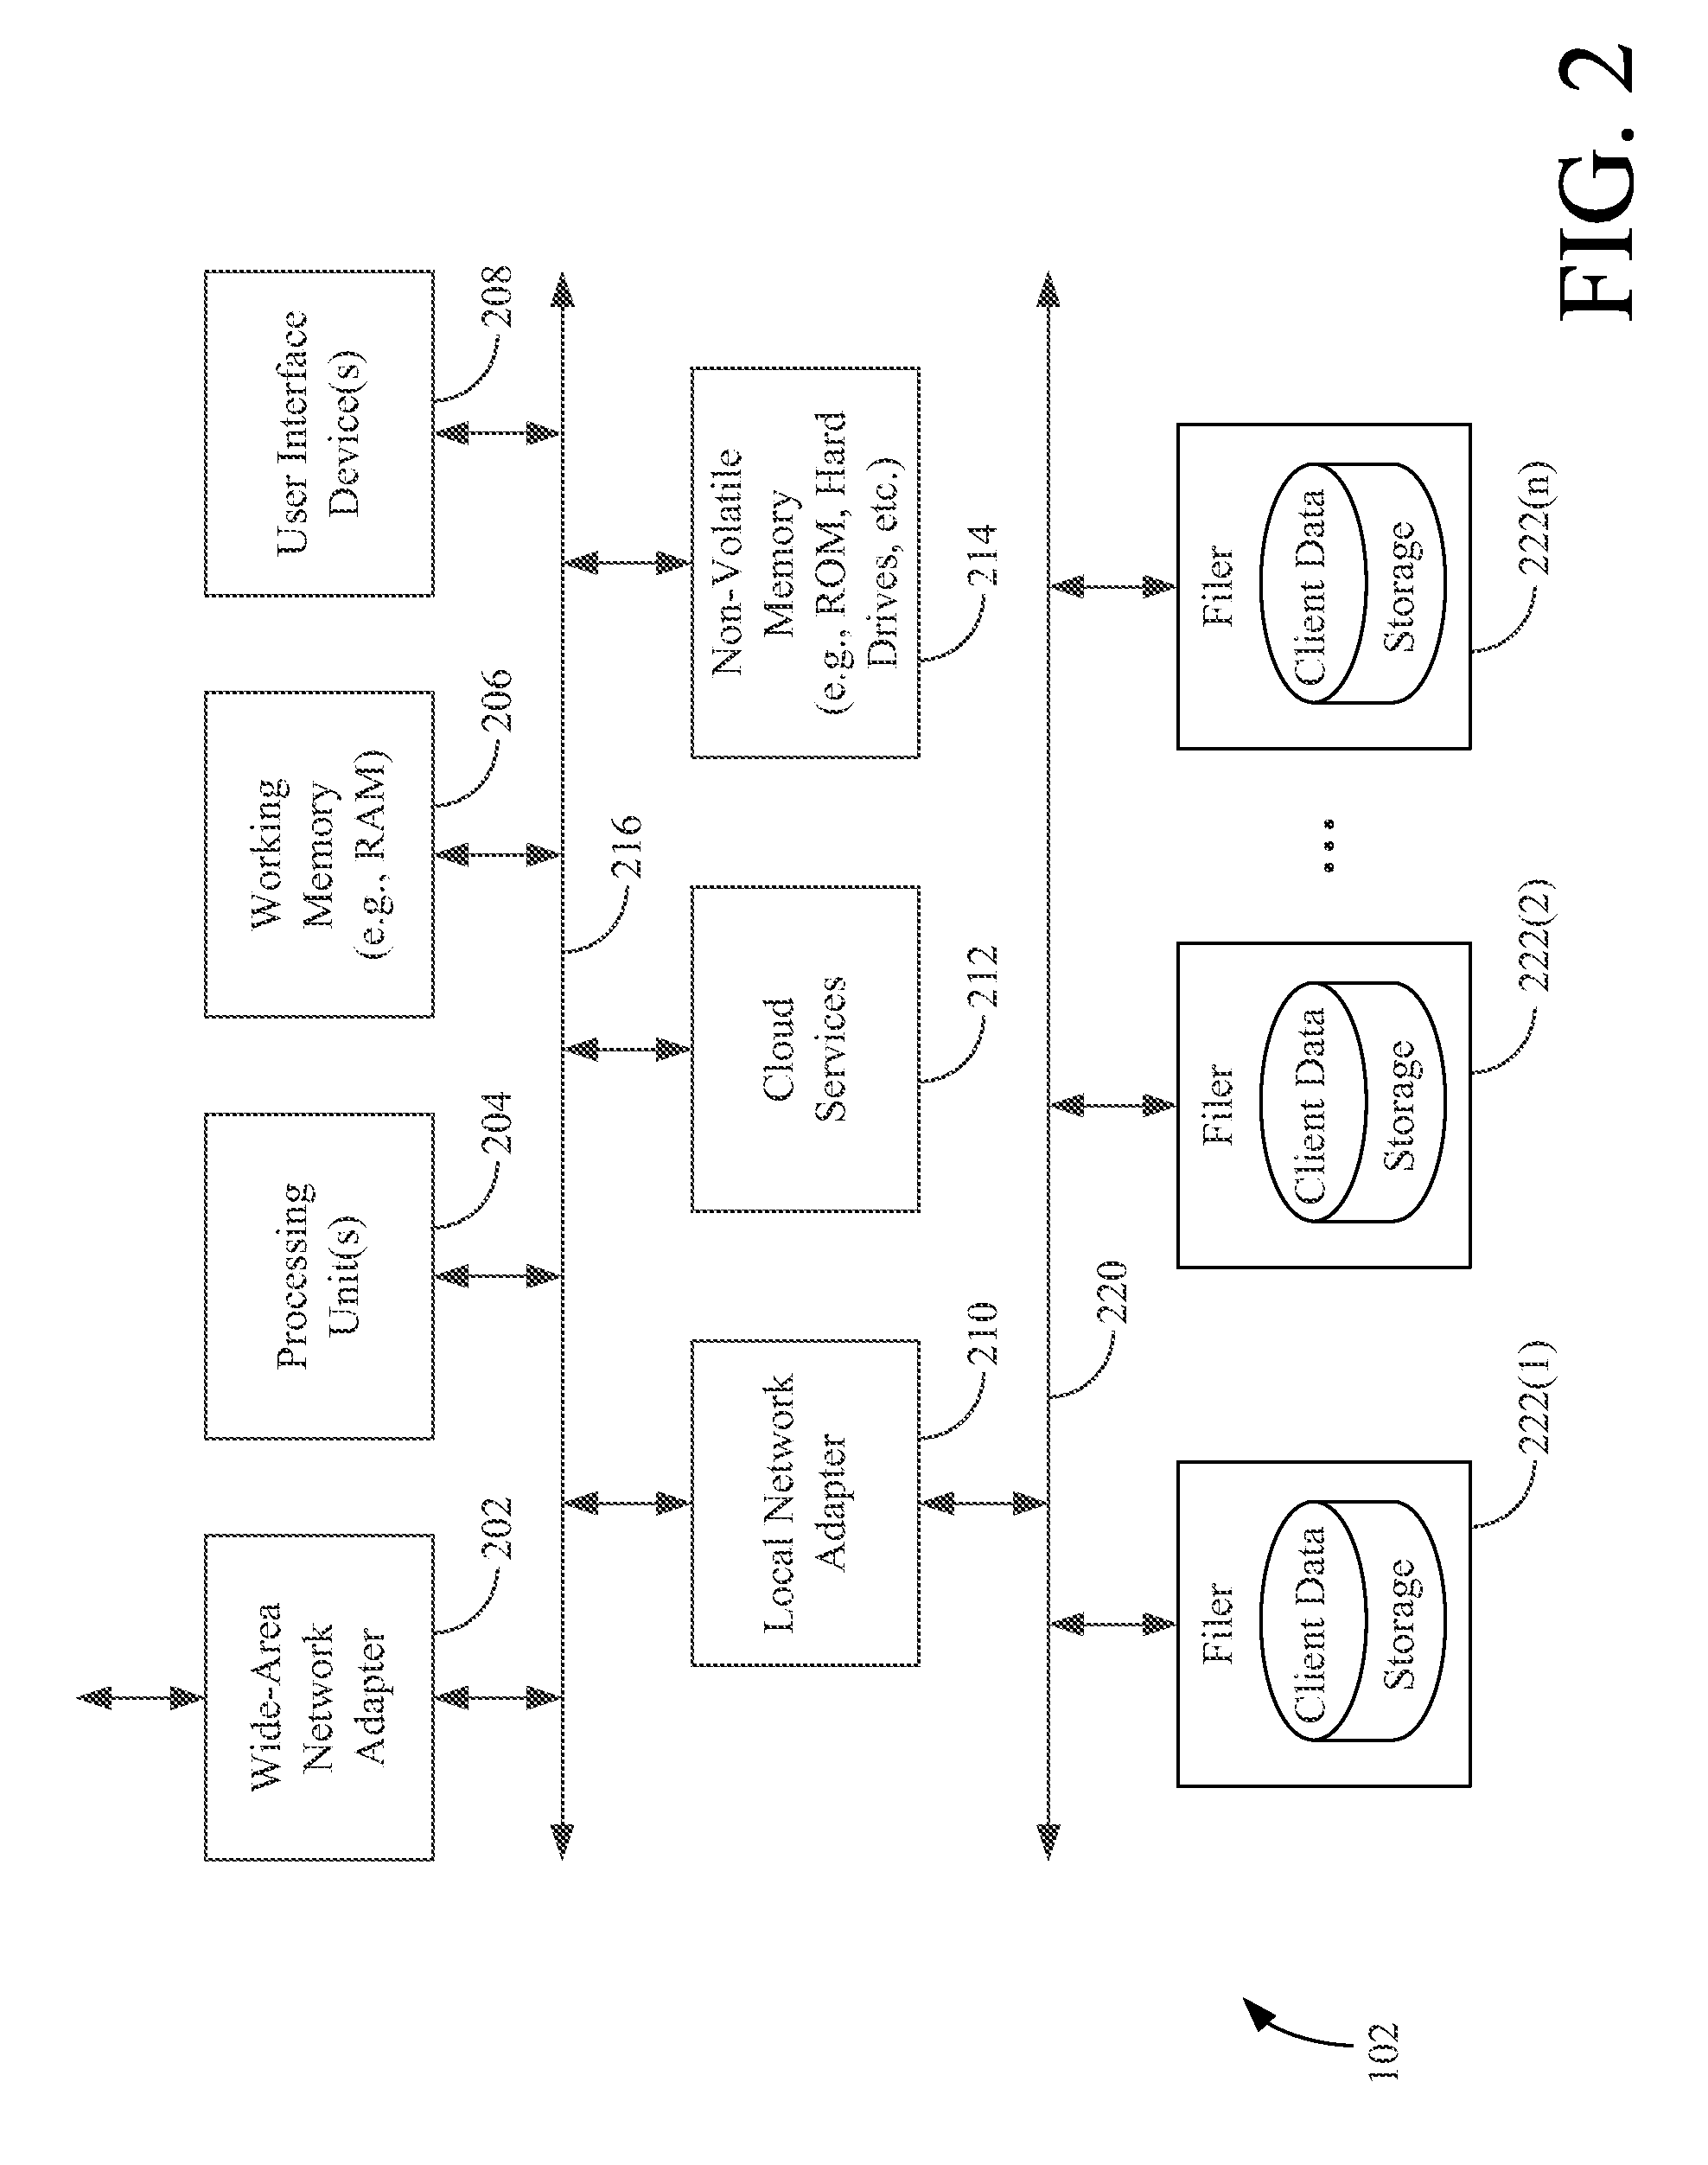 System and method of implementing an object storage infrastructure for cloud-based services